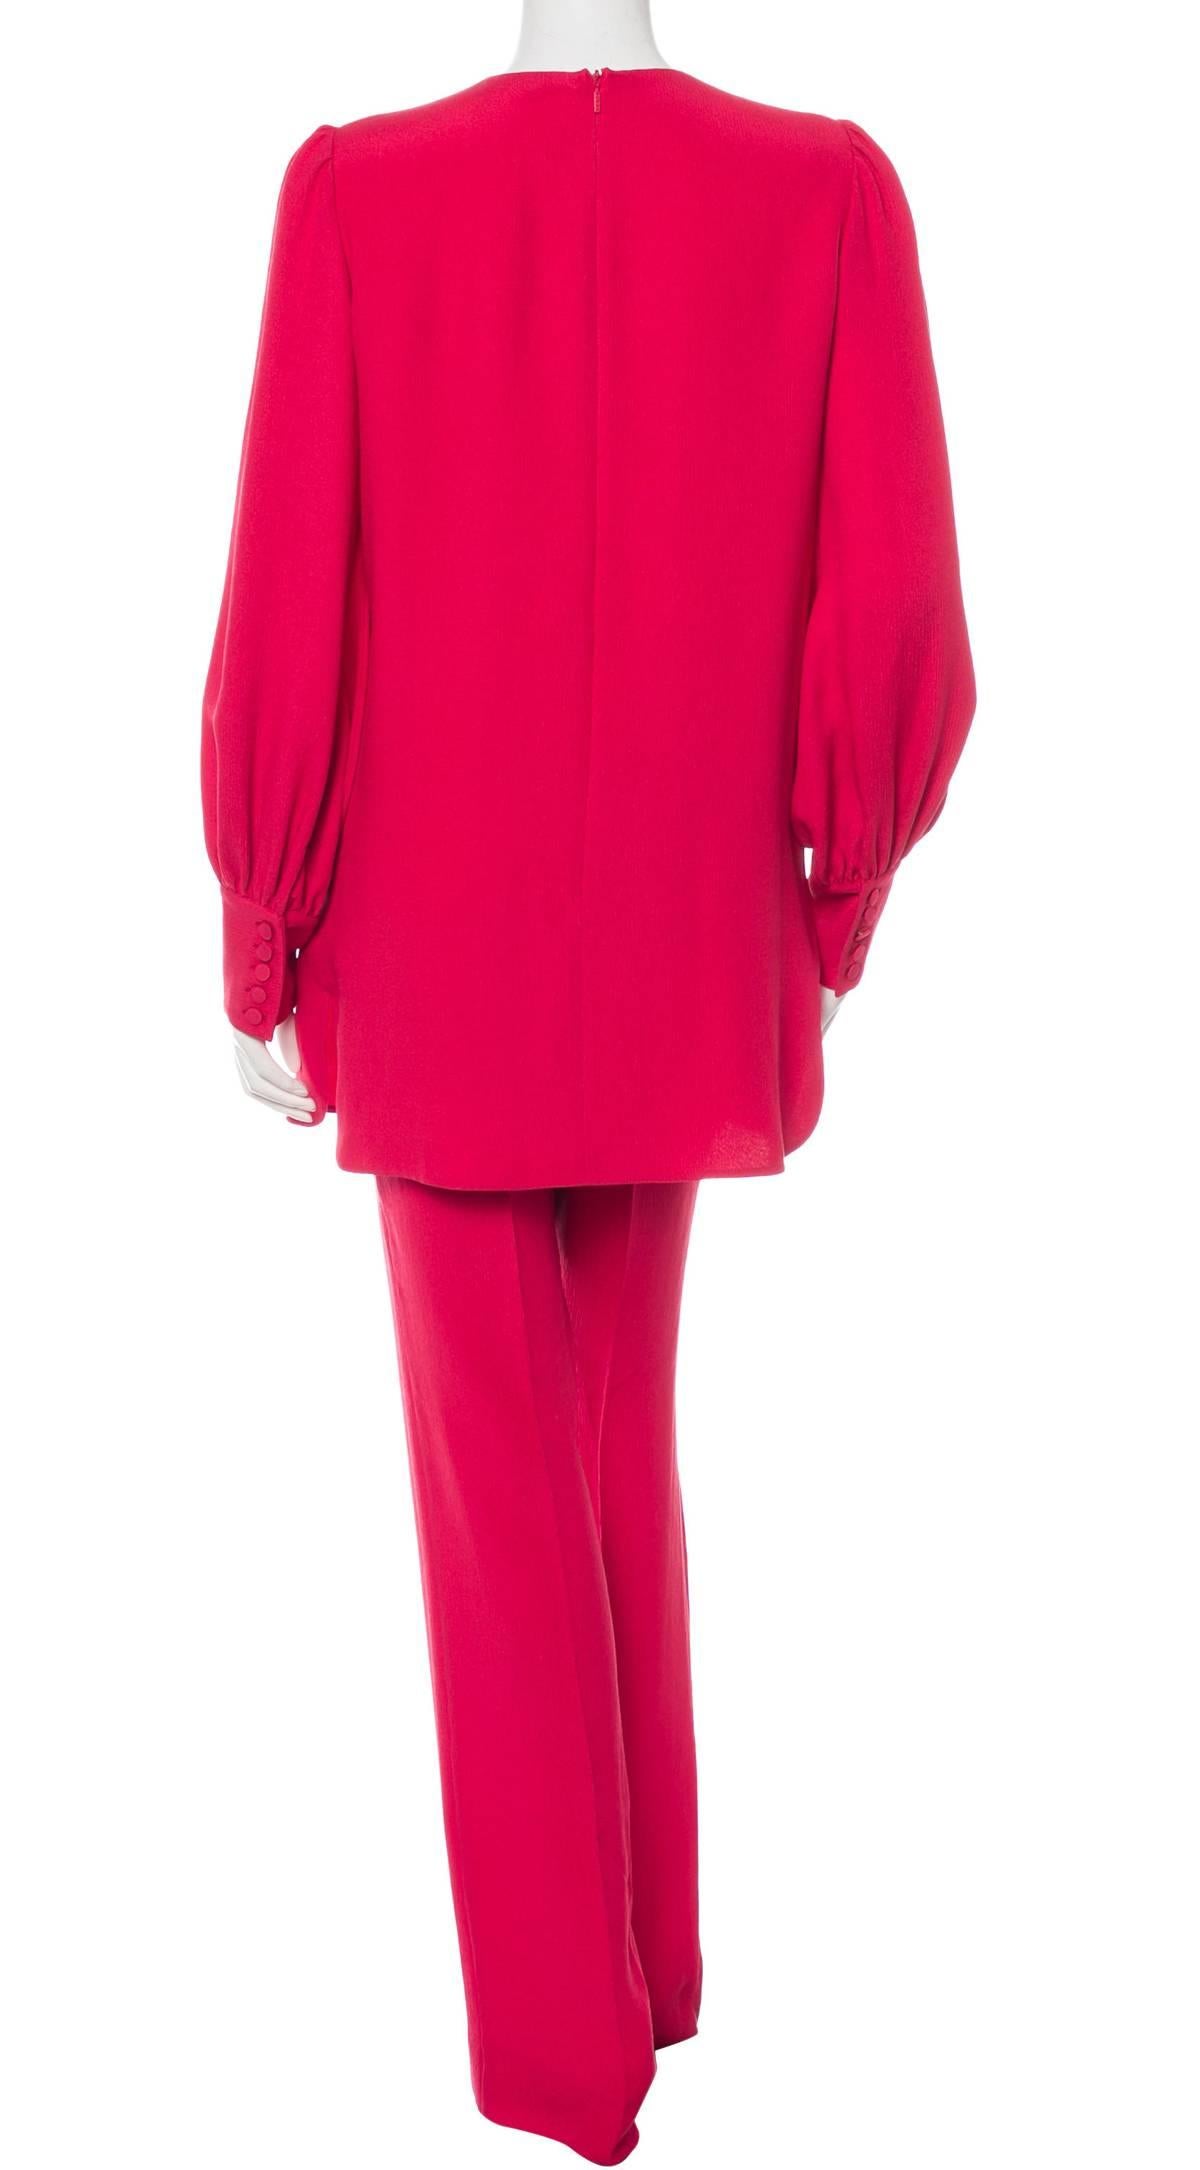 New  GUCCI Silk Embellished Pant Suit
Italian Size 42 - US 6
Color - Fuchsia Red
100% Silk
3-D Crystals & Beads Embellished ( REMOVABLE )
Tunic Measurement Flat: Length - 31 inch, Armpit to Armpit - 18.5 inches, Sleeve - 26".
Fully Lined -